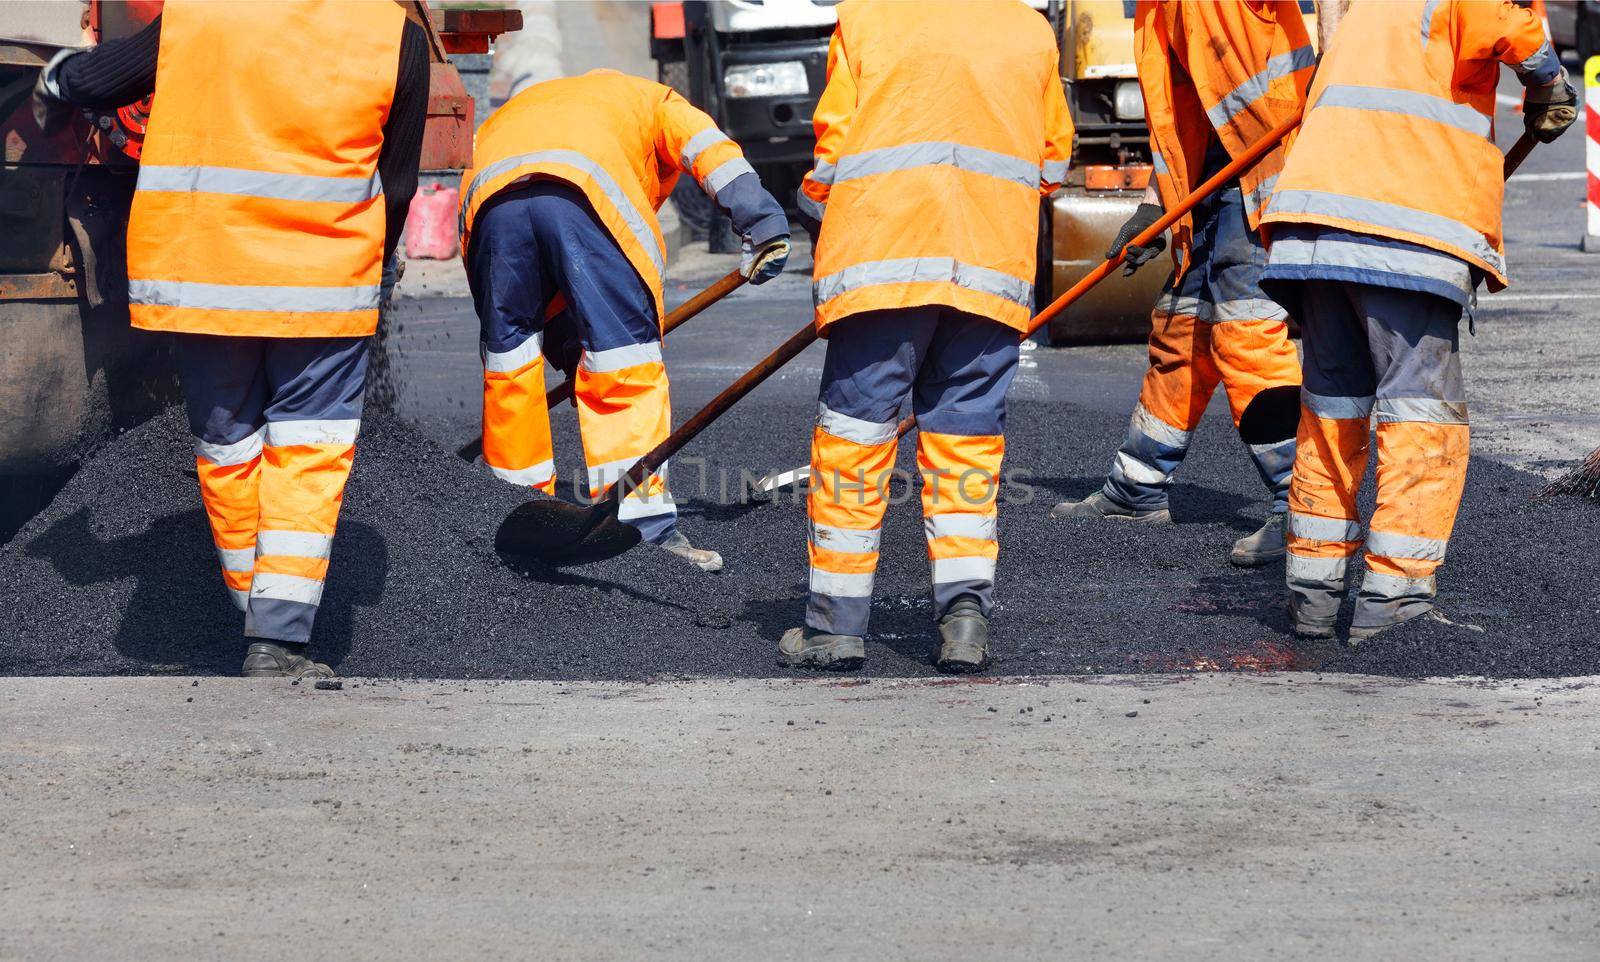 A team of road workers in orange reflective uniforms use shovels to level fresh asphalt on a stretch of road on a clear day. by Sergii